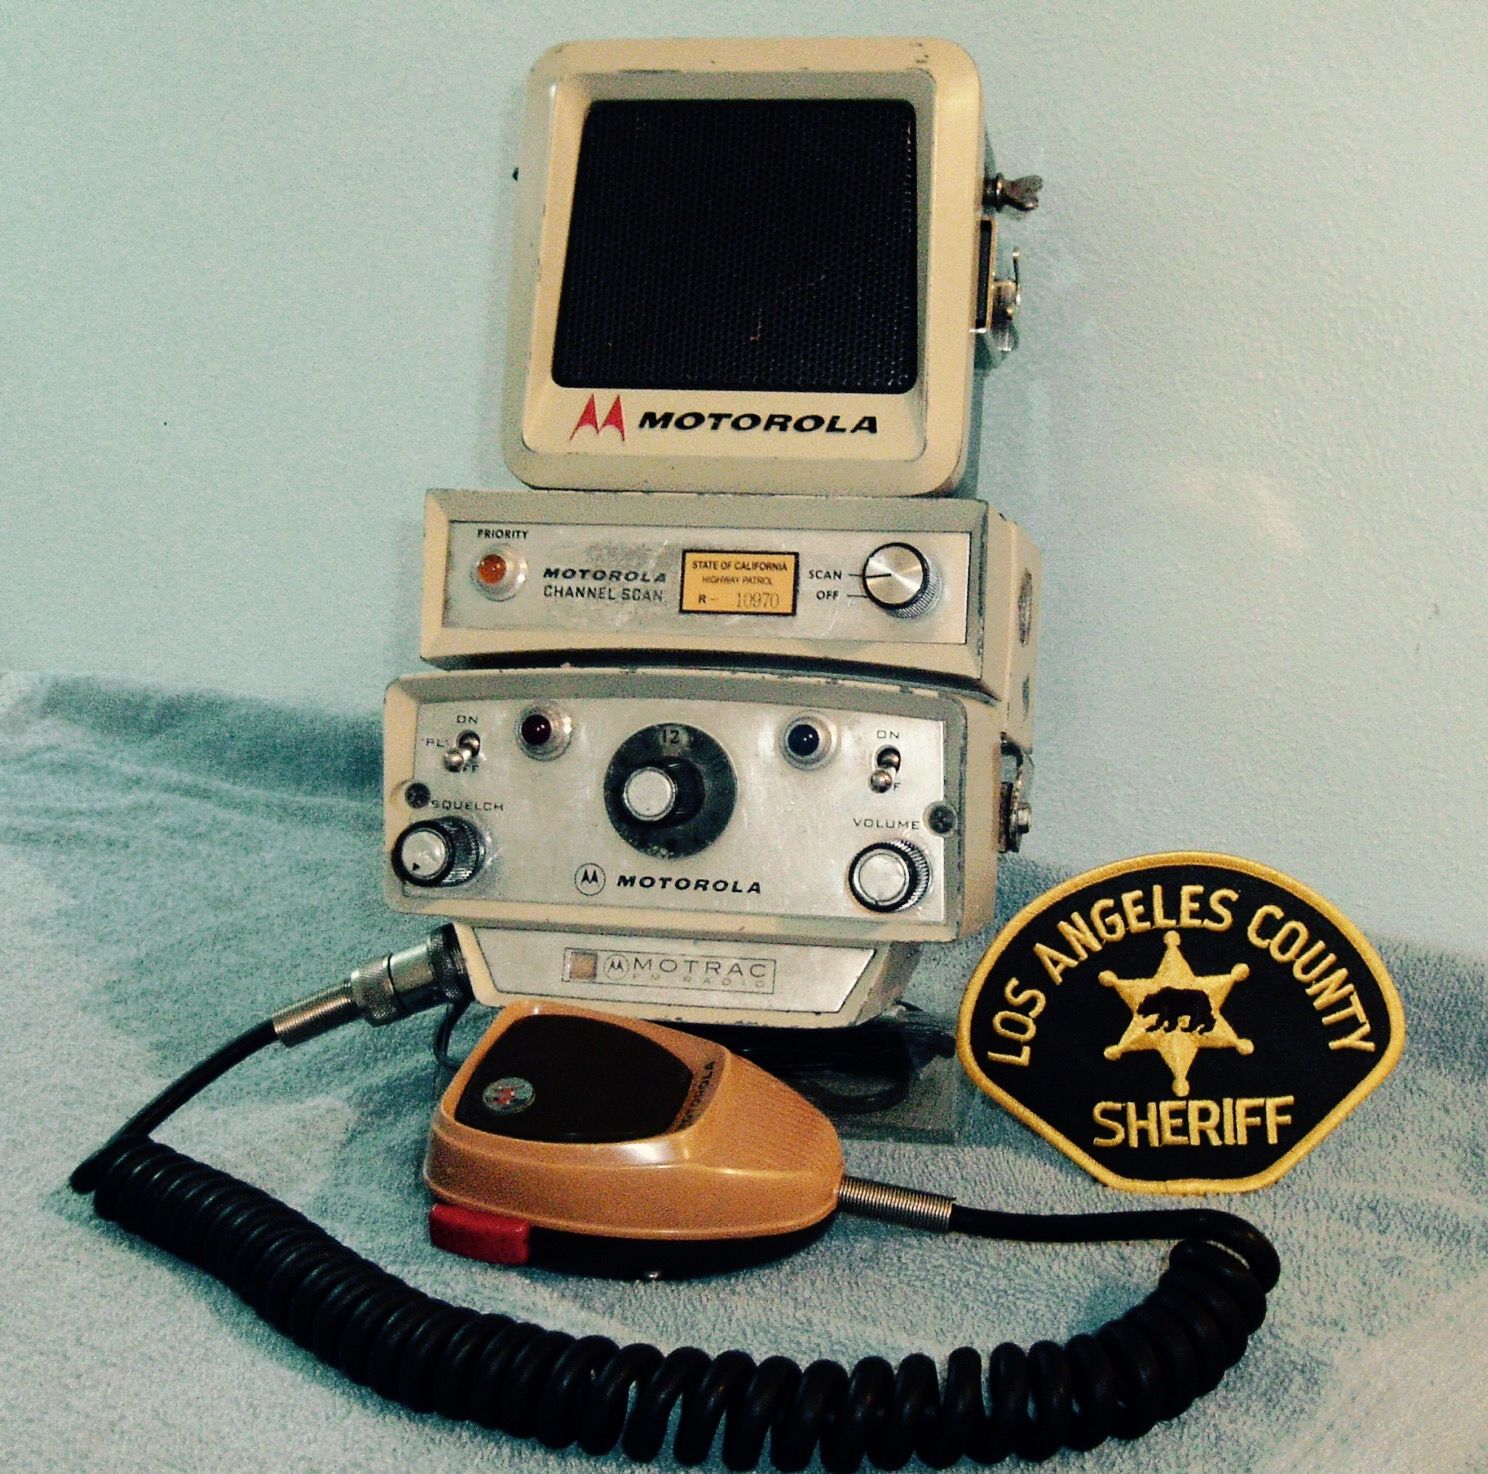 Old police radio head. Type of police radio used in 1960